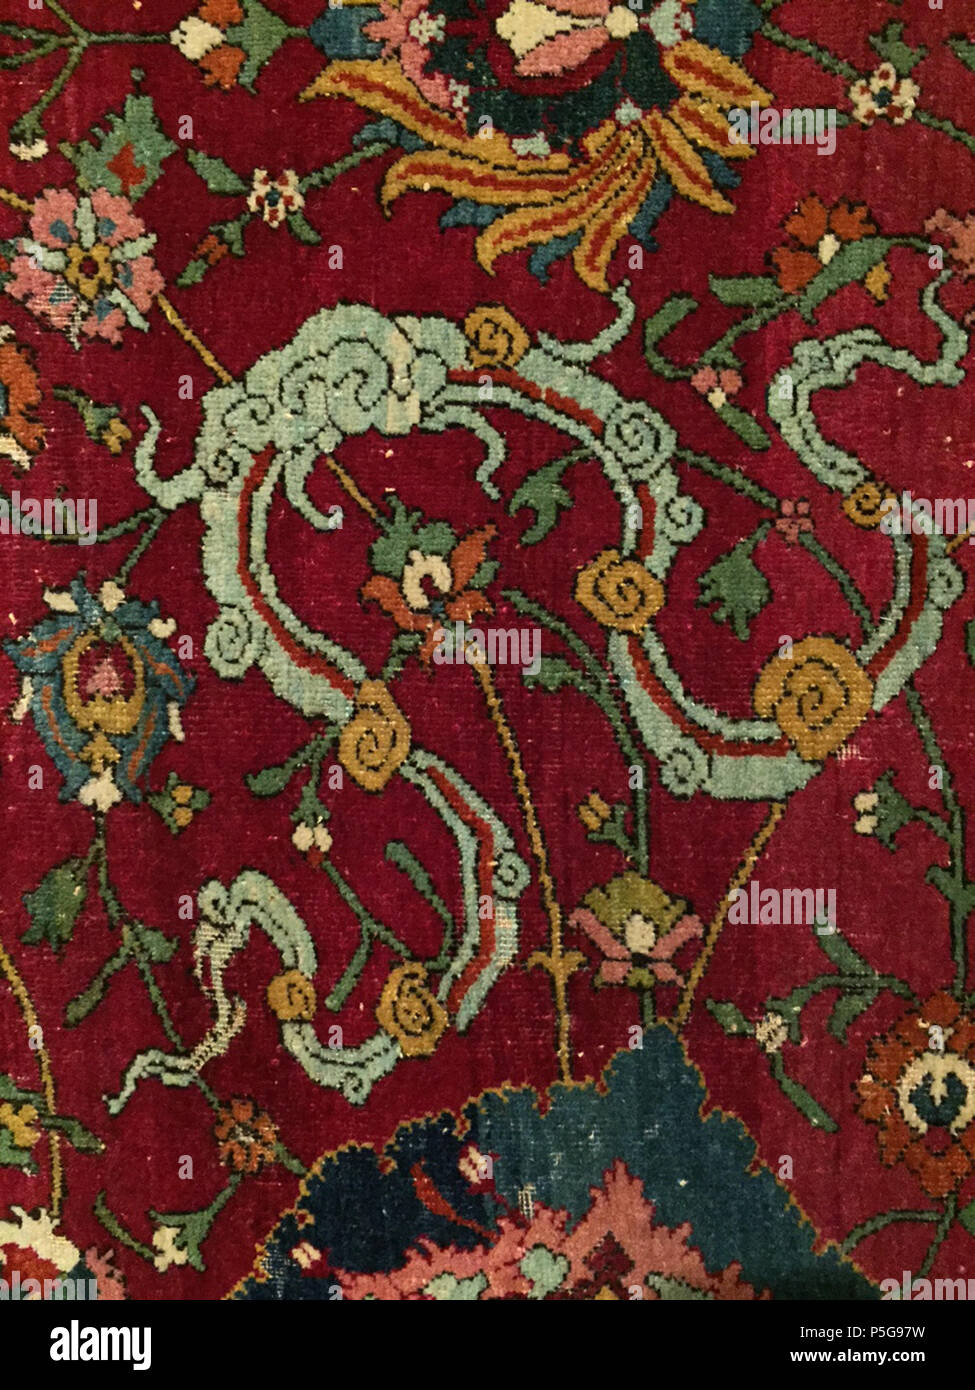 N/A. English: Detail of a Persian Animal carpet, Safavid period, Persia, 16th century . 11 September 2015, 11:25:48. Safavid Court Manufacture, 16th cenury 354 Cloud band Hamburg MKG Safavid animal carpet detail Stock Photo